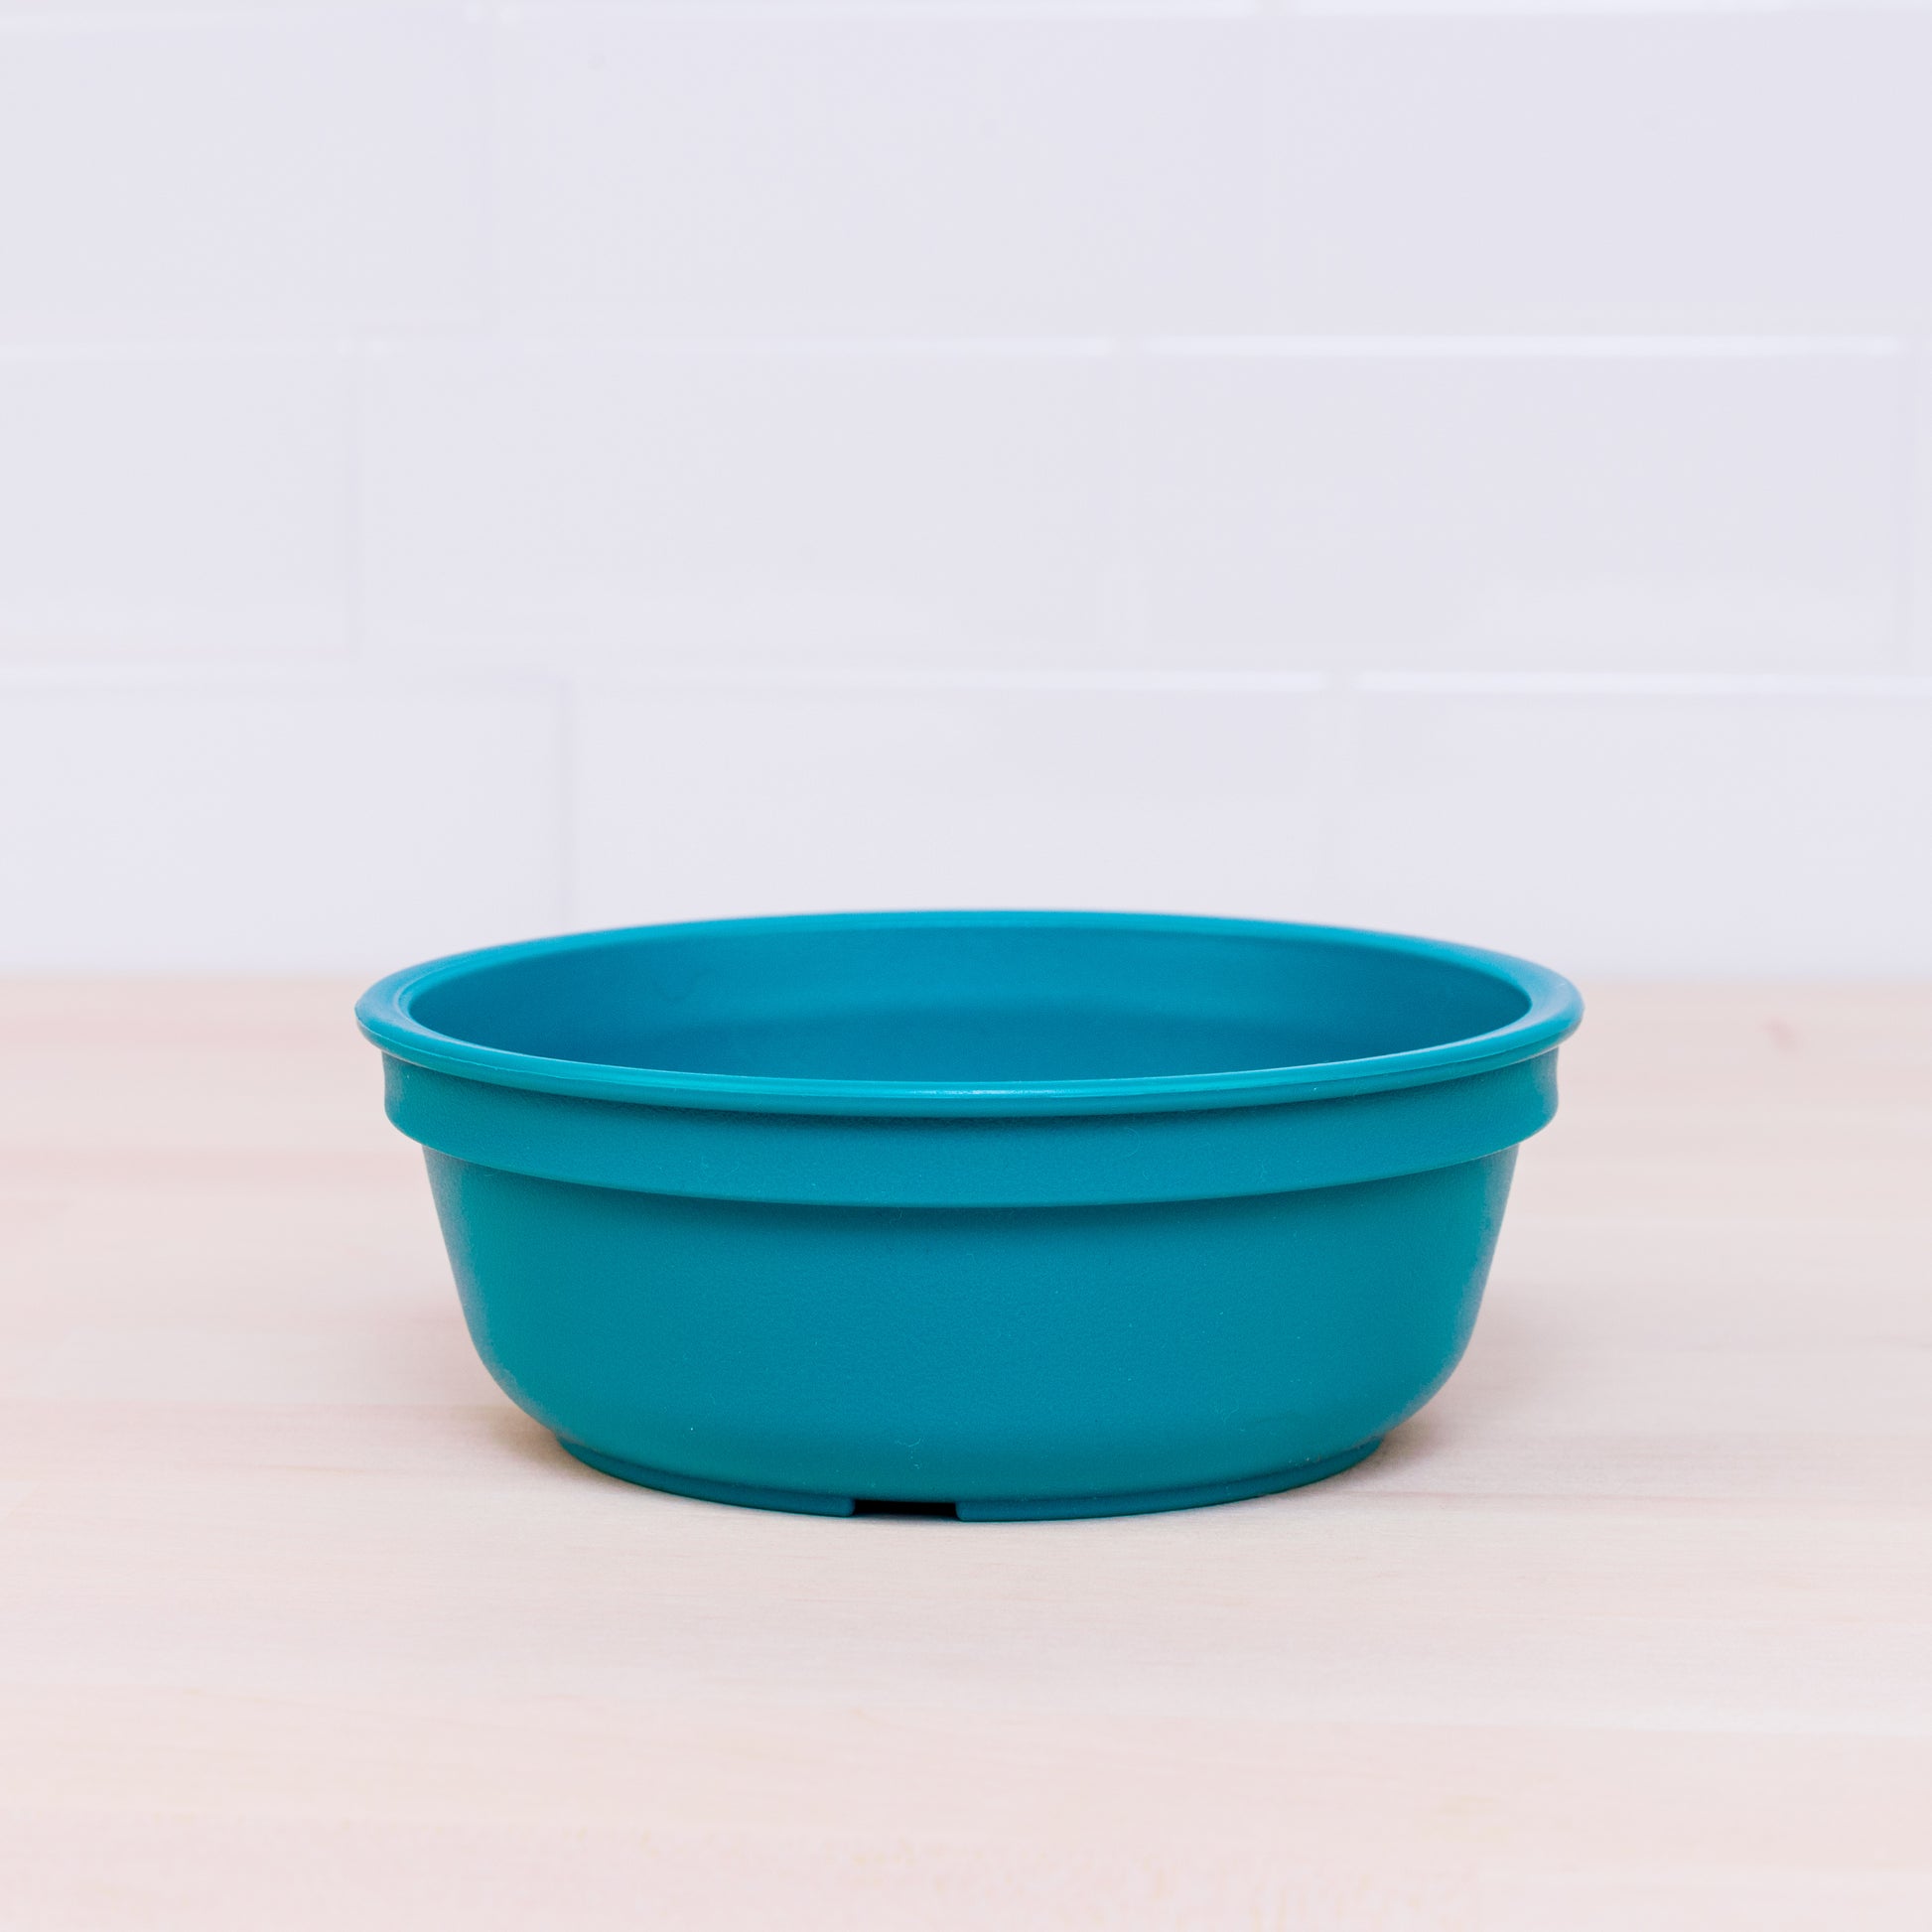 Re-Play Bowl | Standard Size in Teal from Bear & Moo